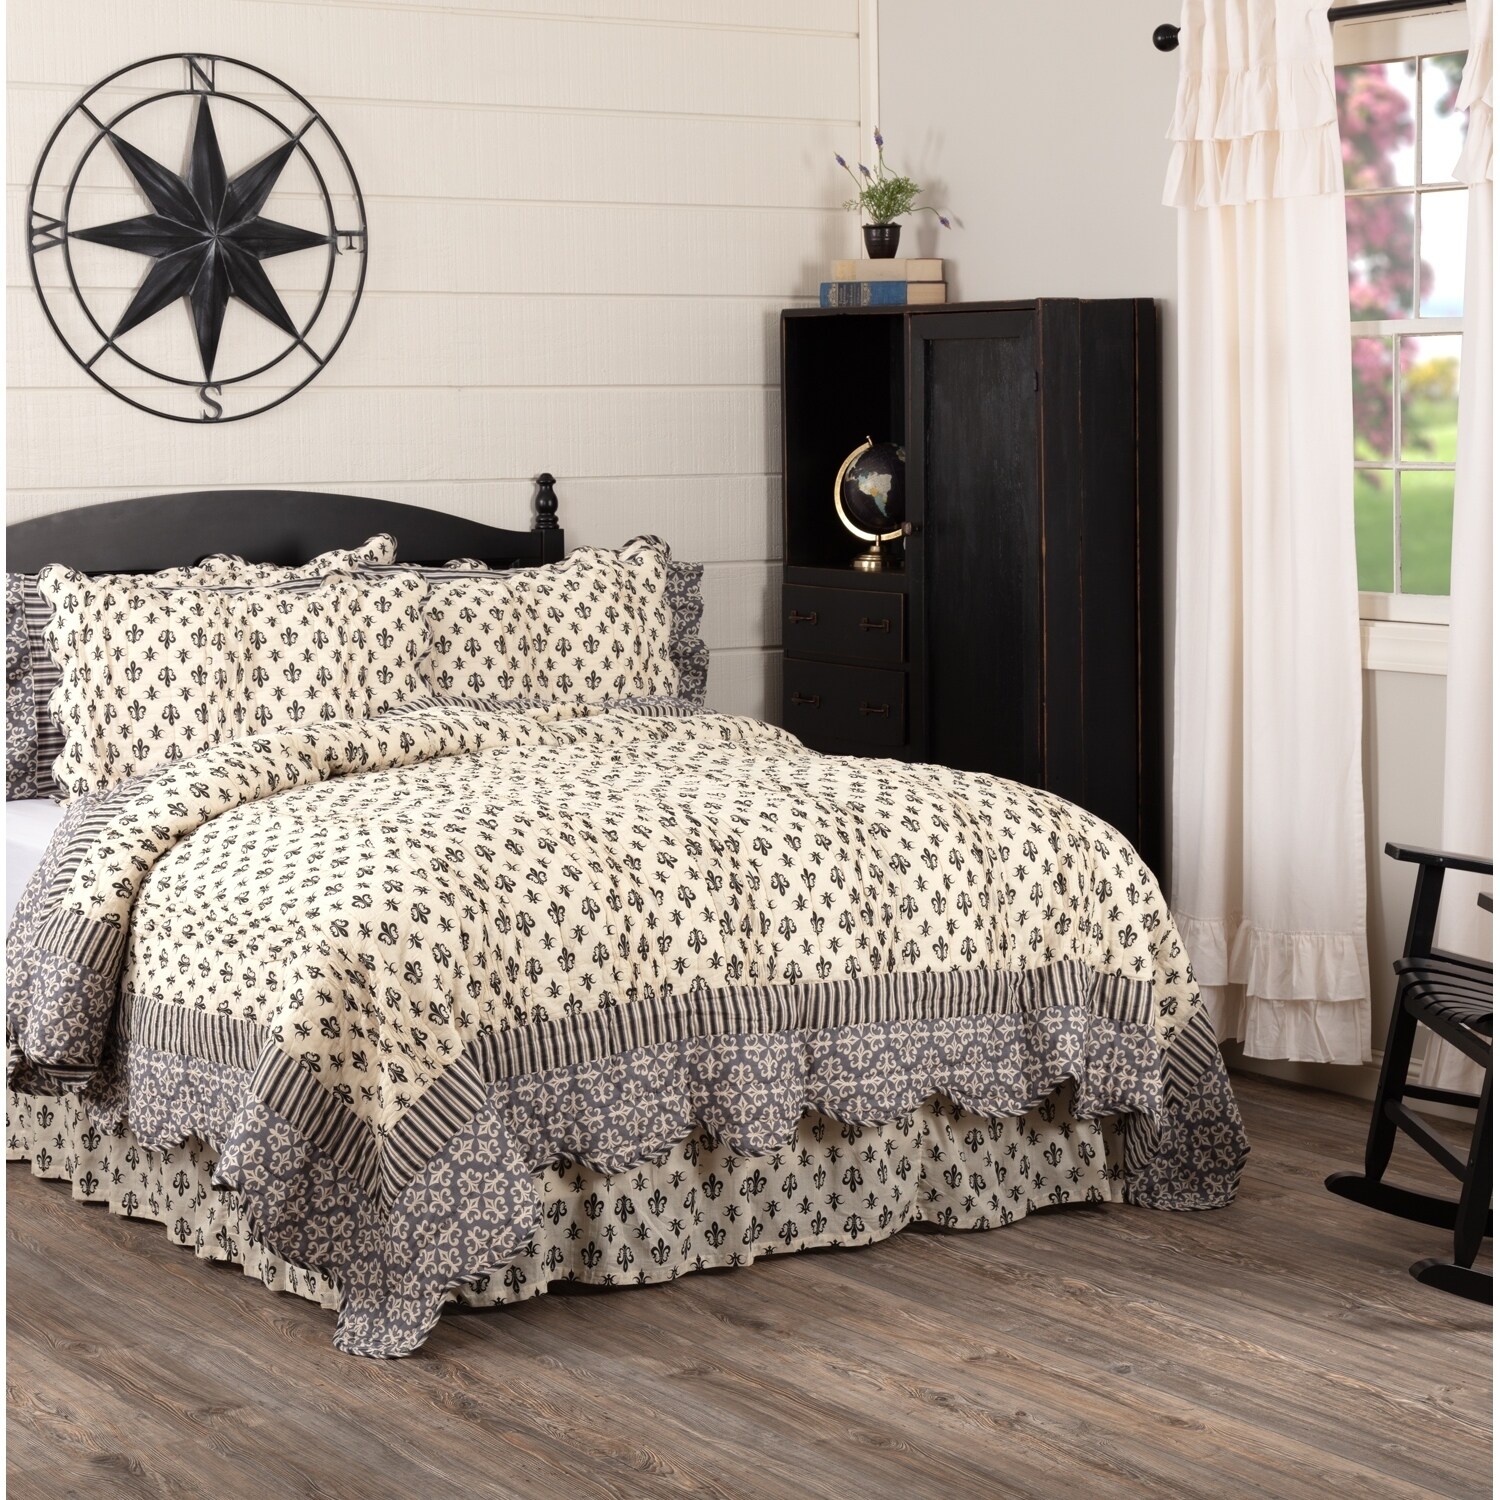 Shop Elysee Quilt On Sale Overstock 15437887